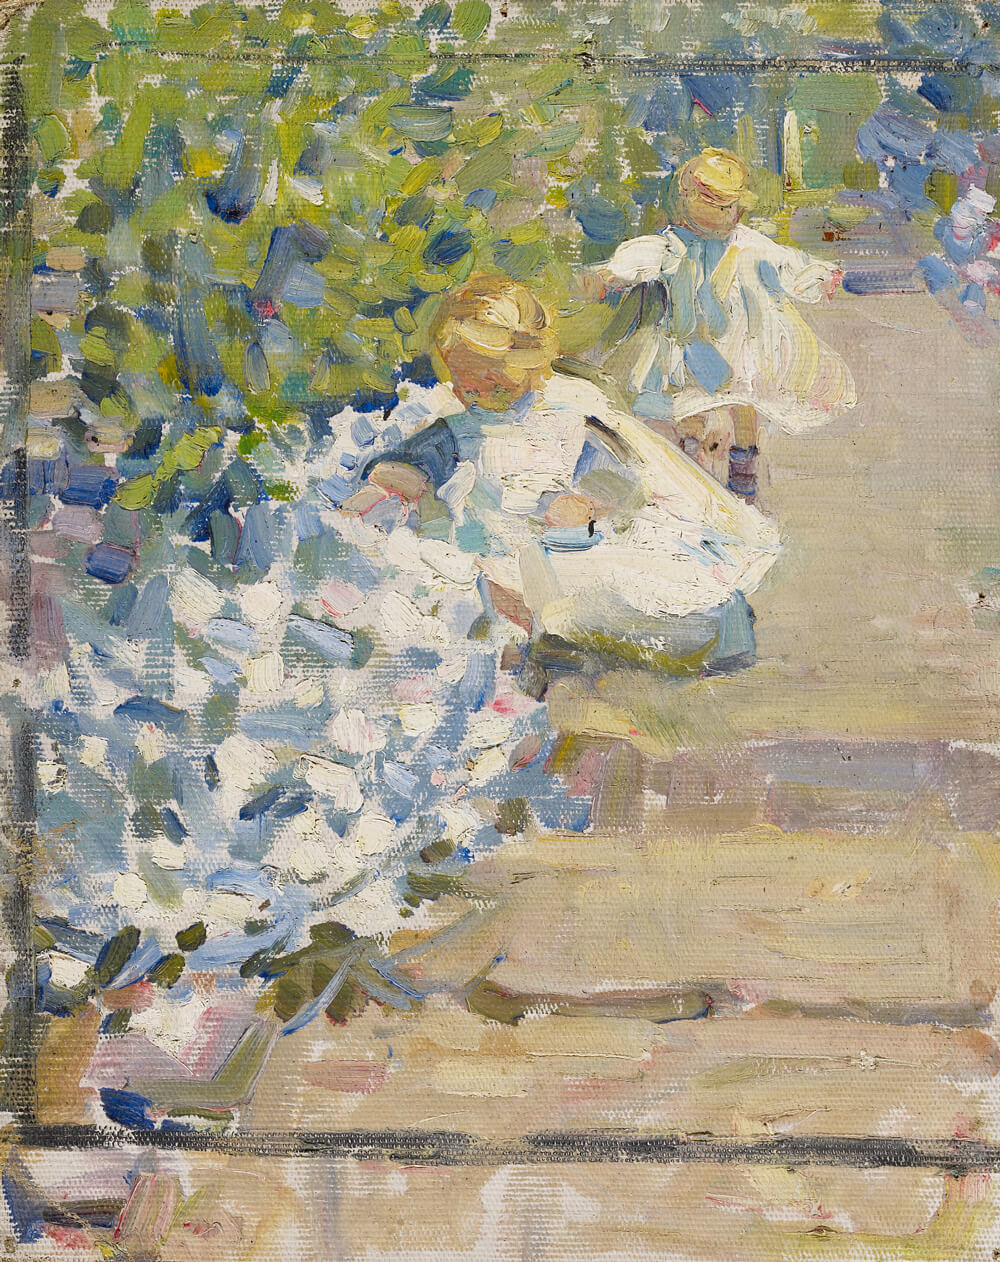 Sketch for “Picking Flowers,”, c. 1912, Helen McNicoll